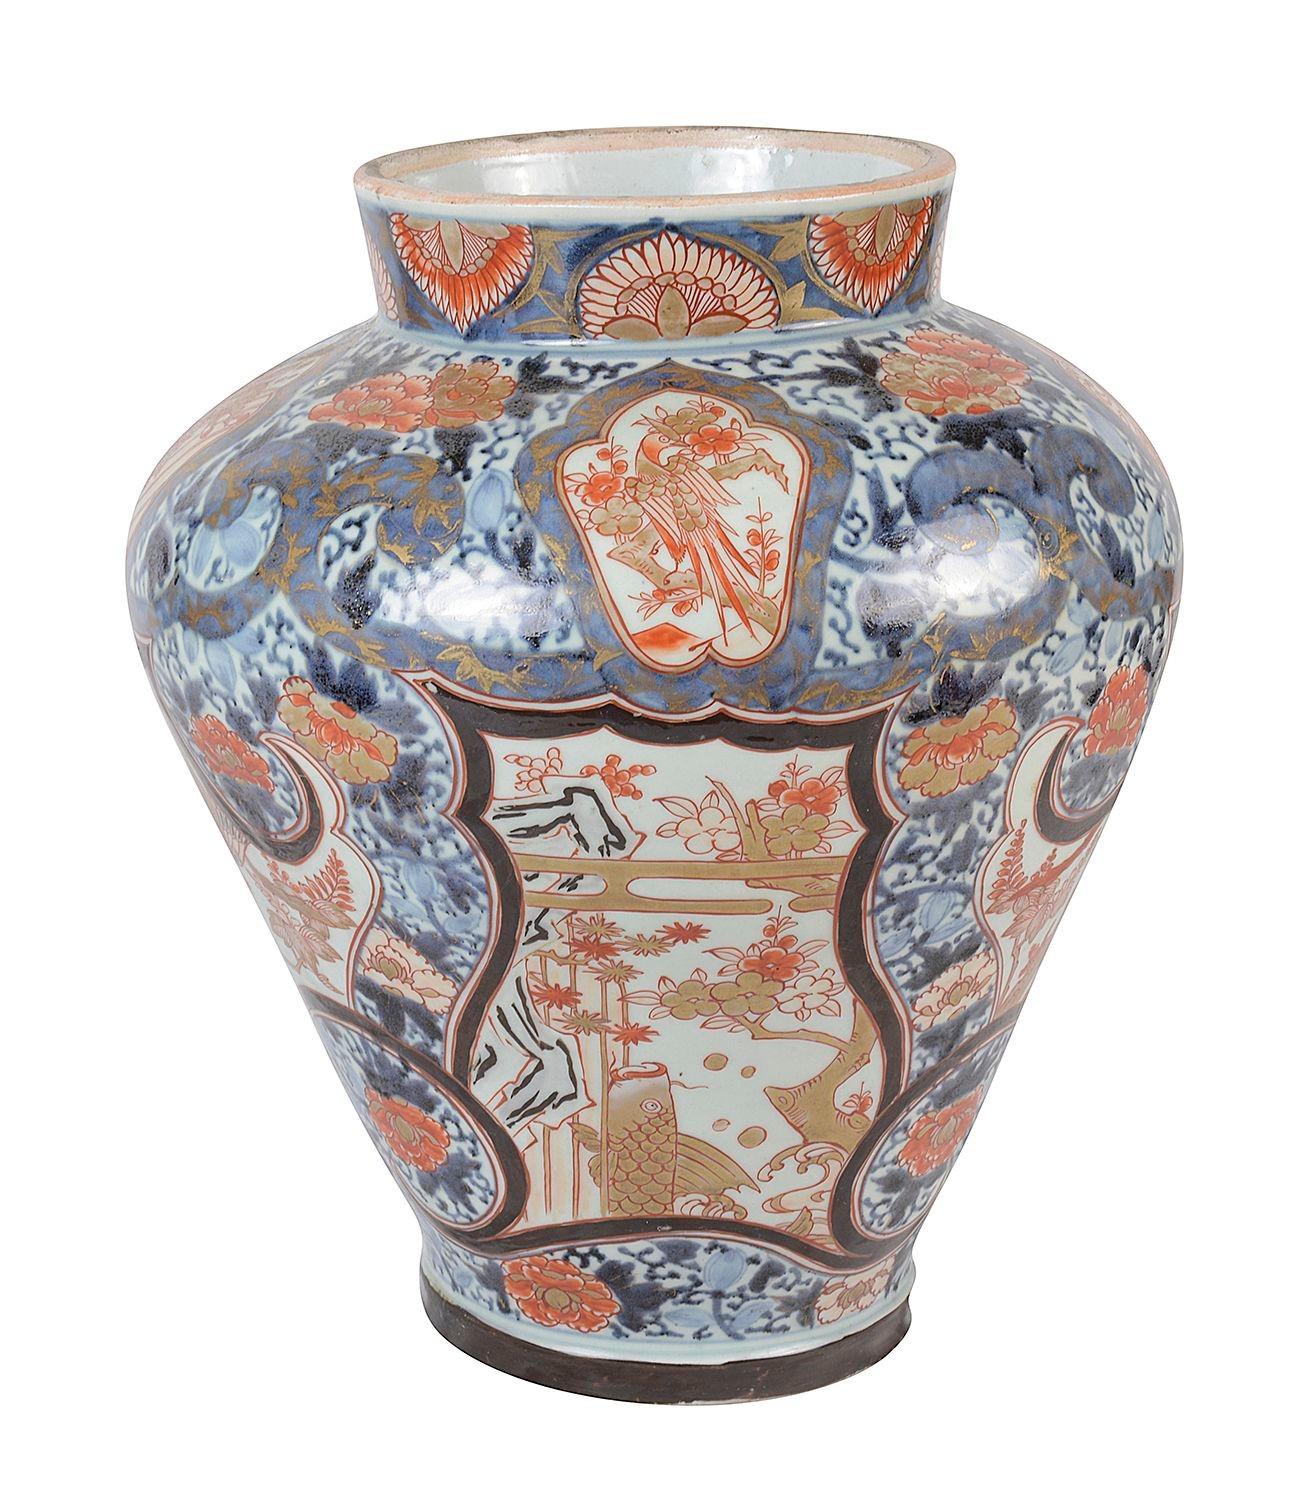 An impressive and decorative 18th Century Arita Imari vase / lamp.
Having wonderful bold colouring, classical scrolling foliate and motif decoration, with inset hand painted panels depicting an exotic bird.
We can convert this vase to a lamp if